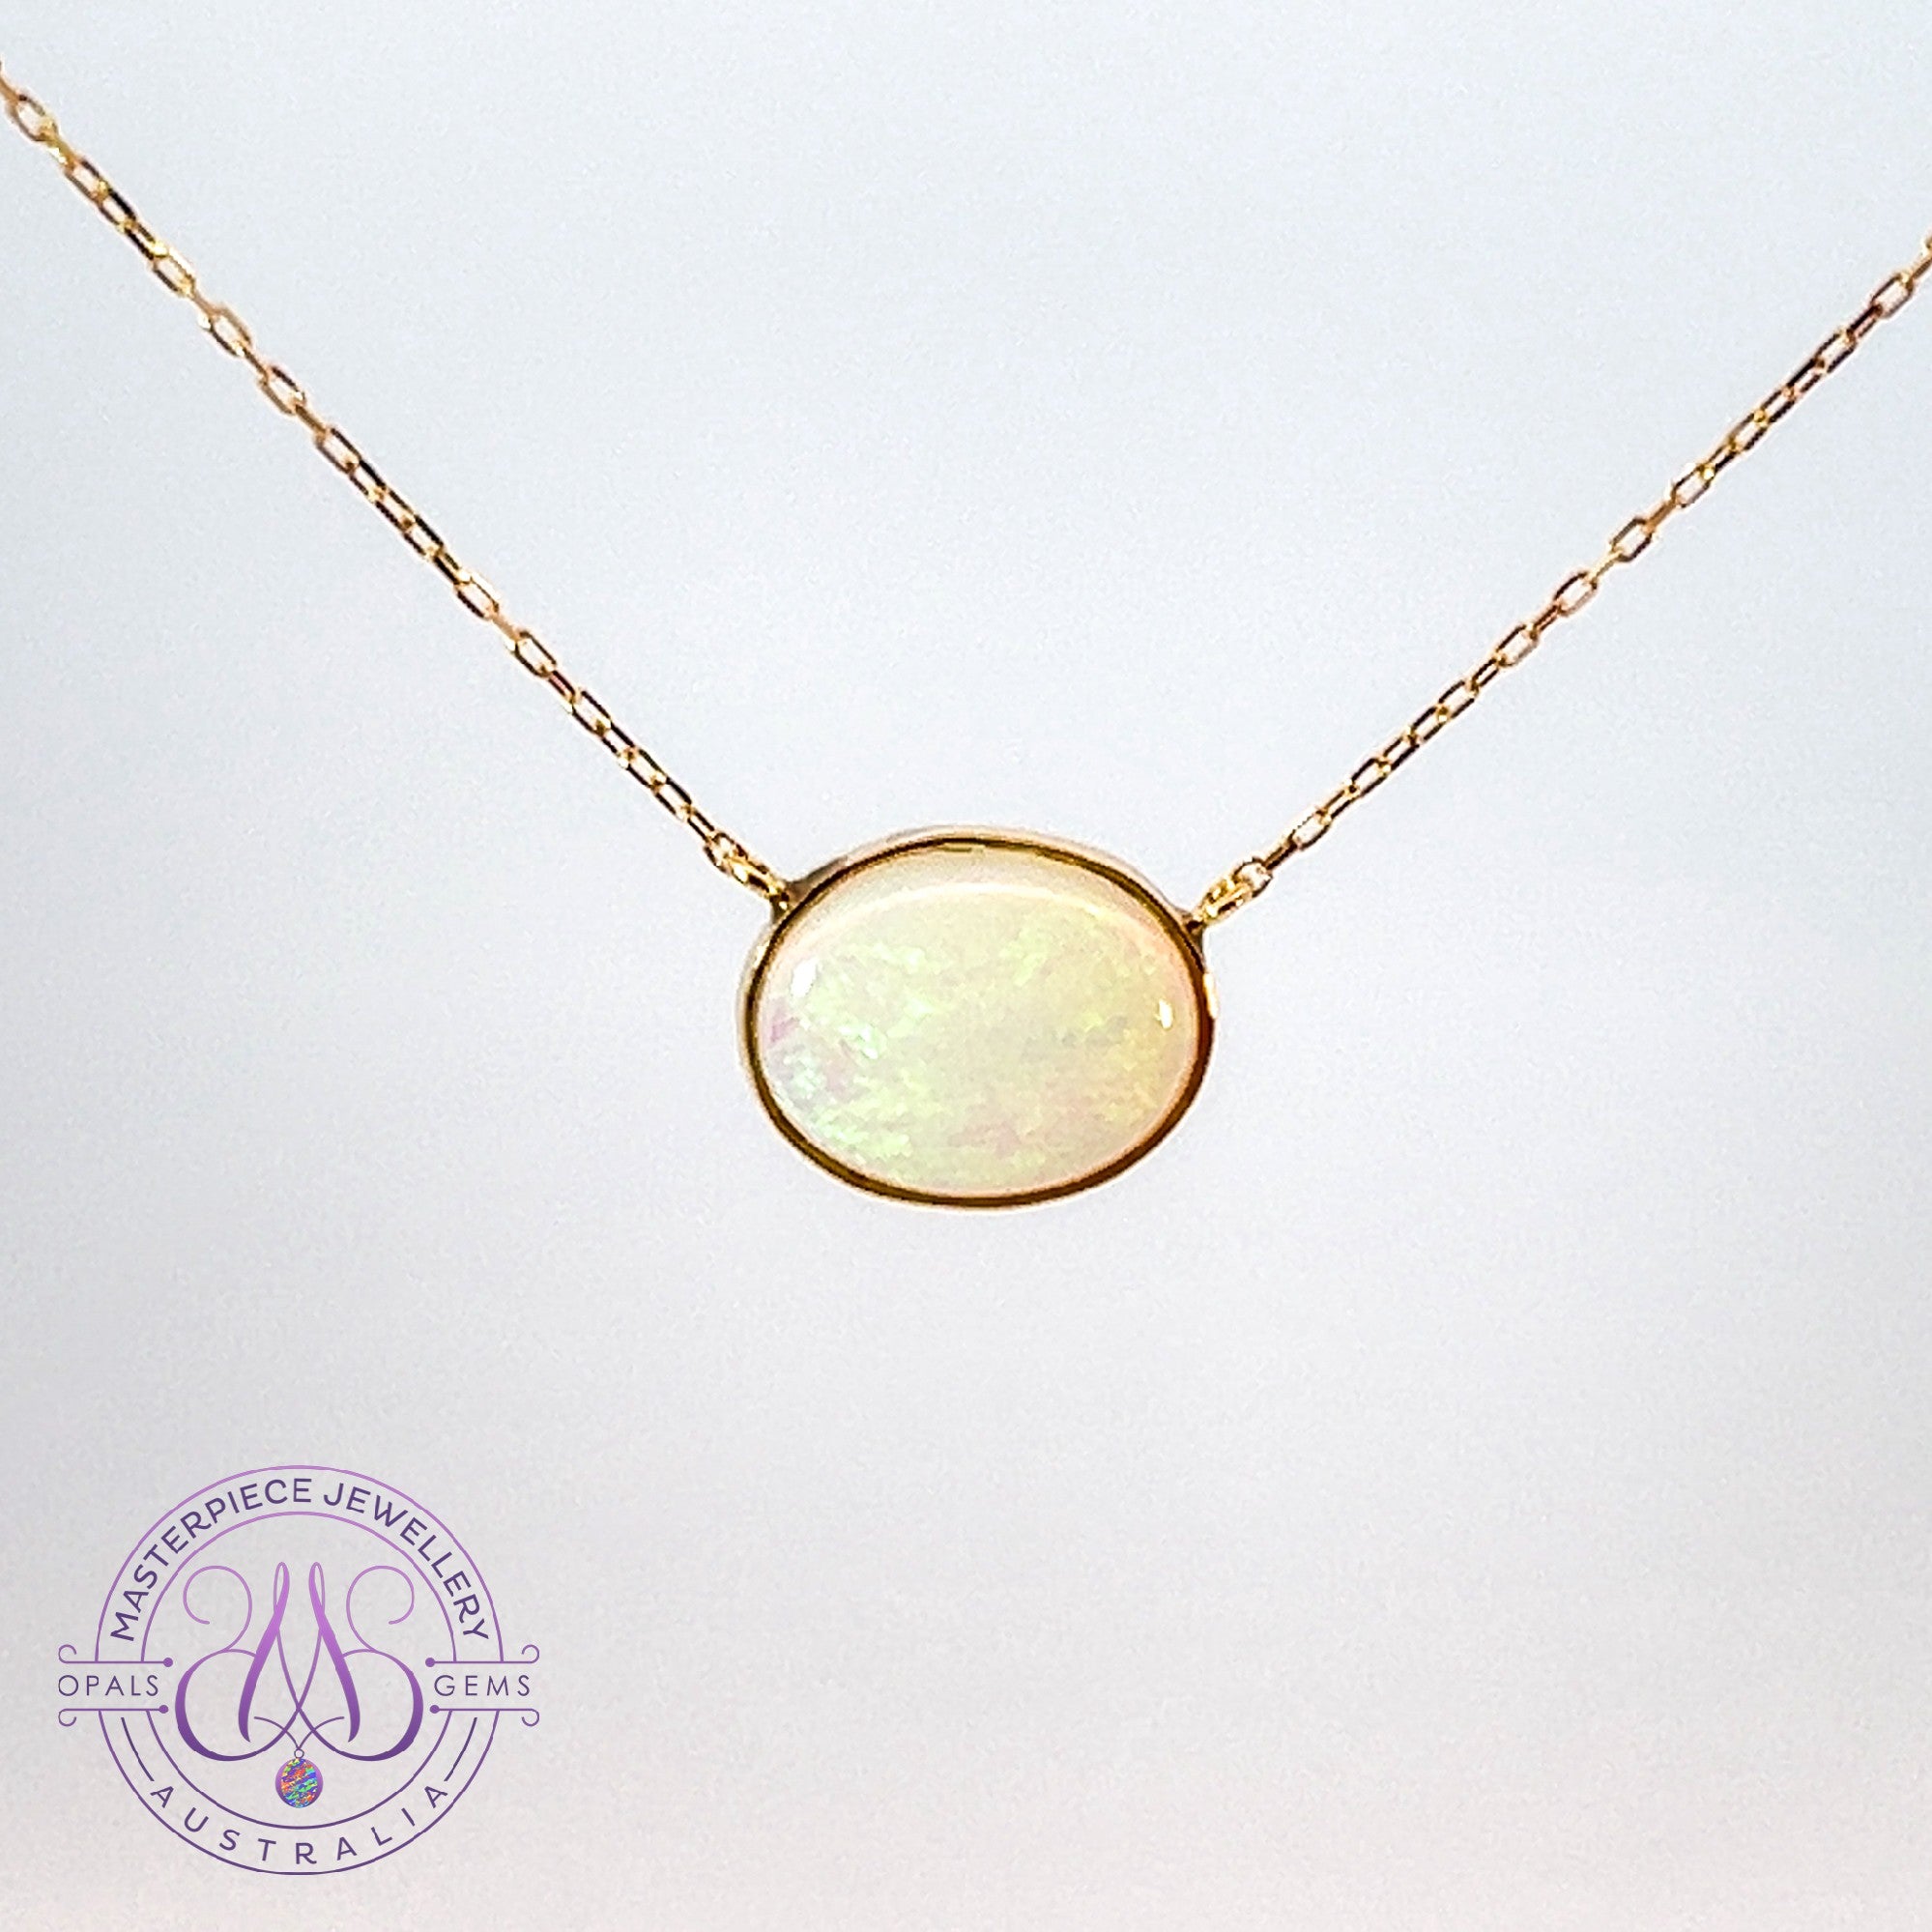 18kt Yellow Gold 0.7ct Opal solitaire necklace 